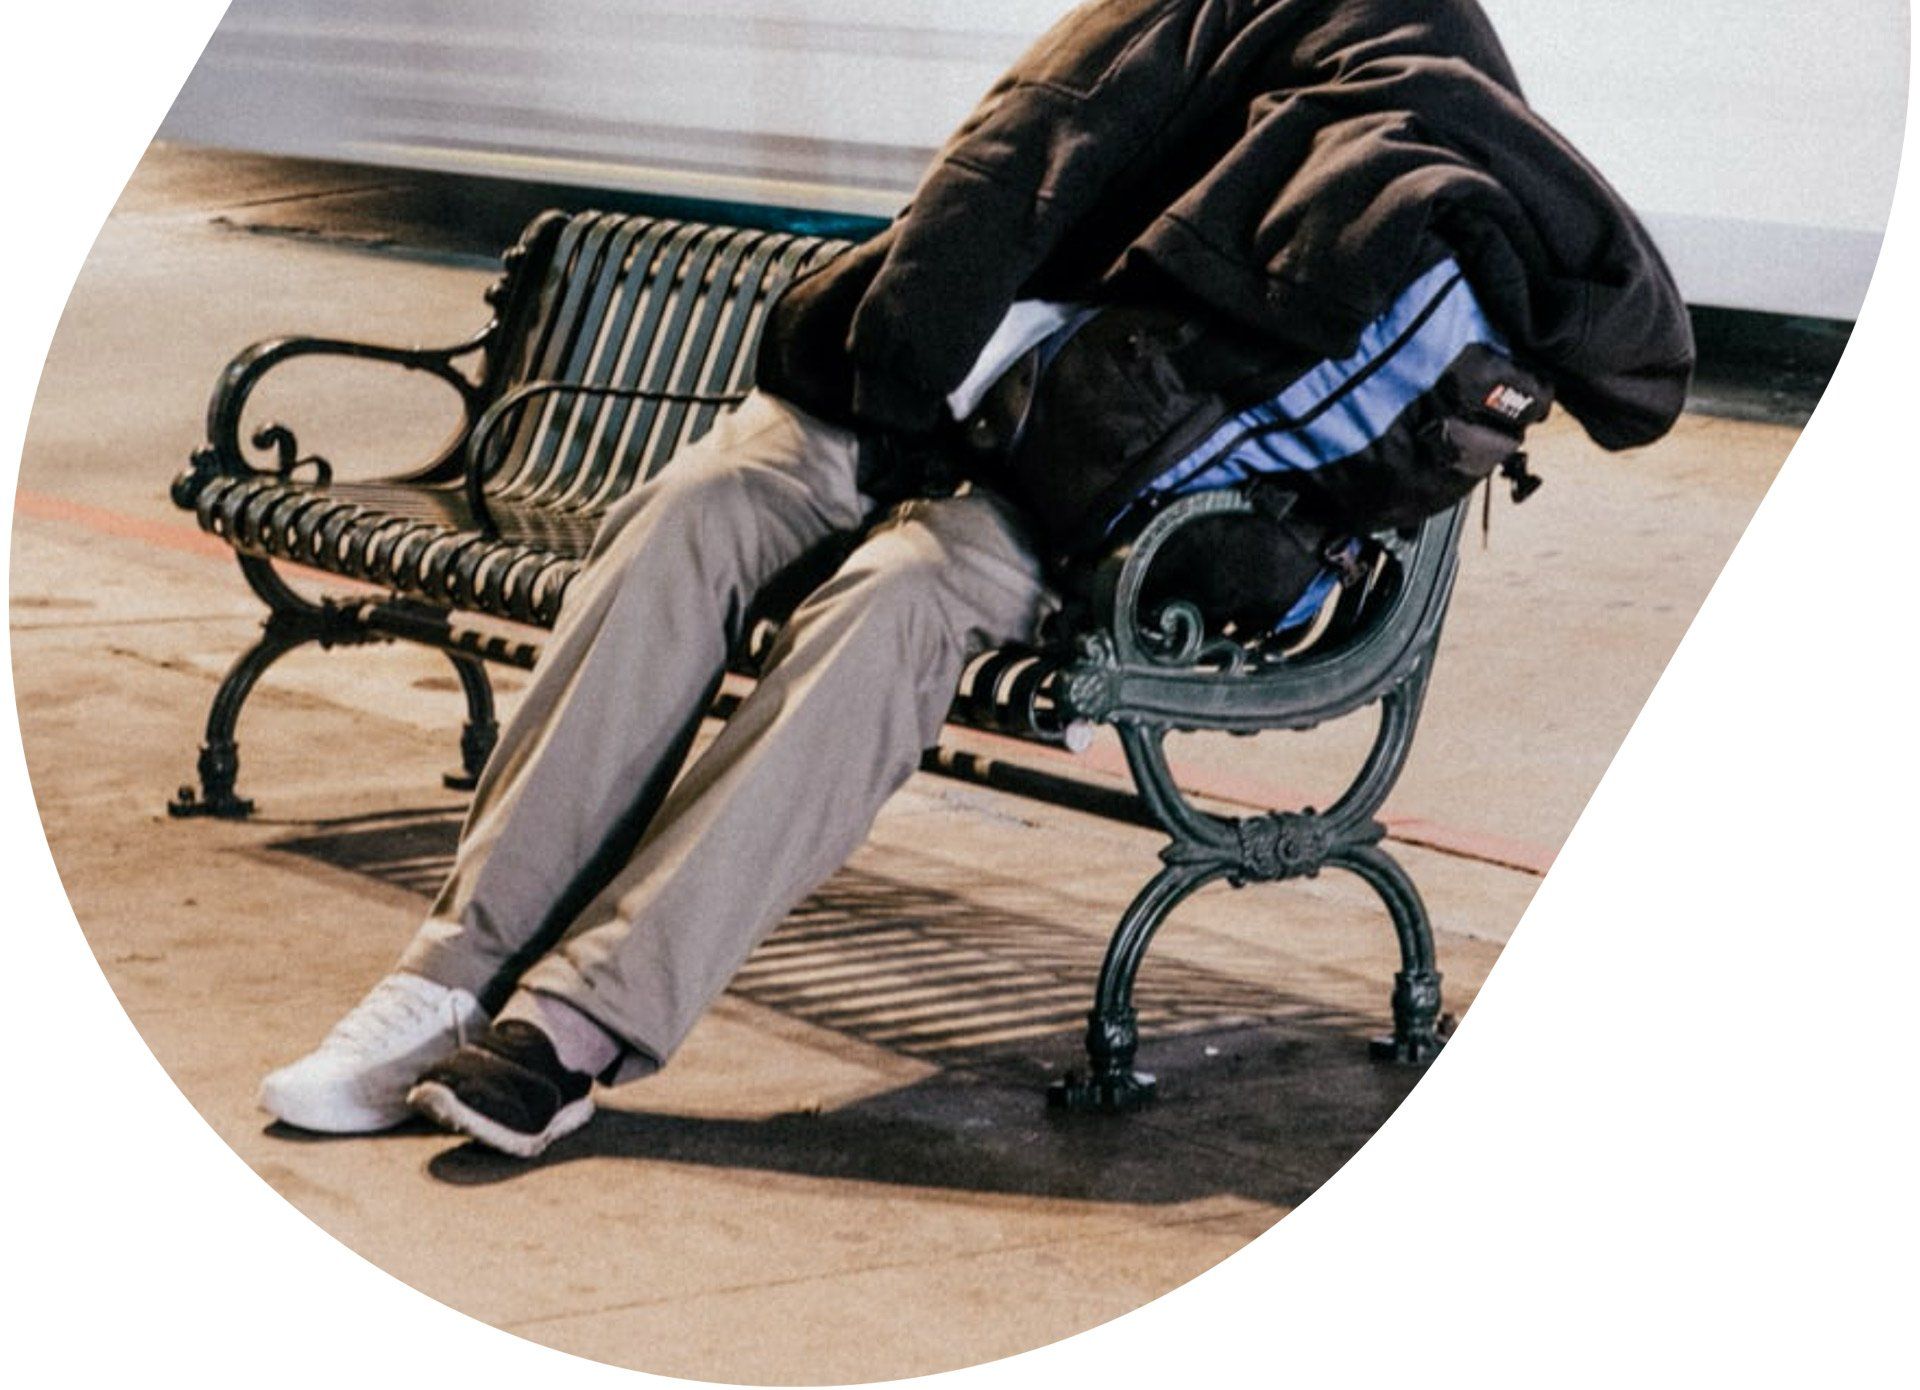 homeless man on a street bench with mismatched shoes